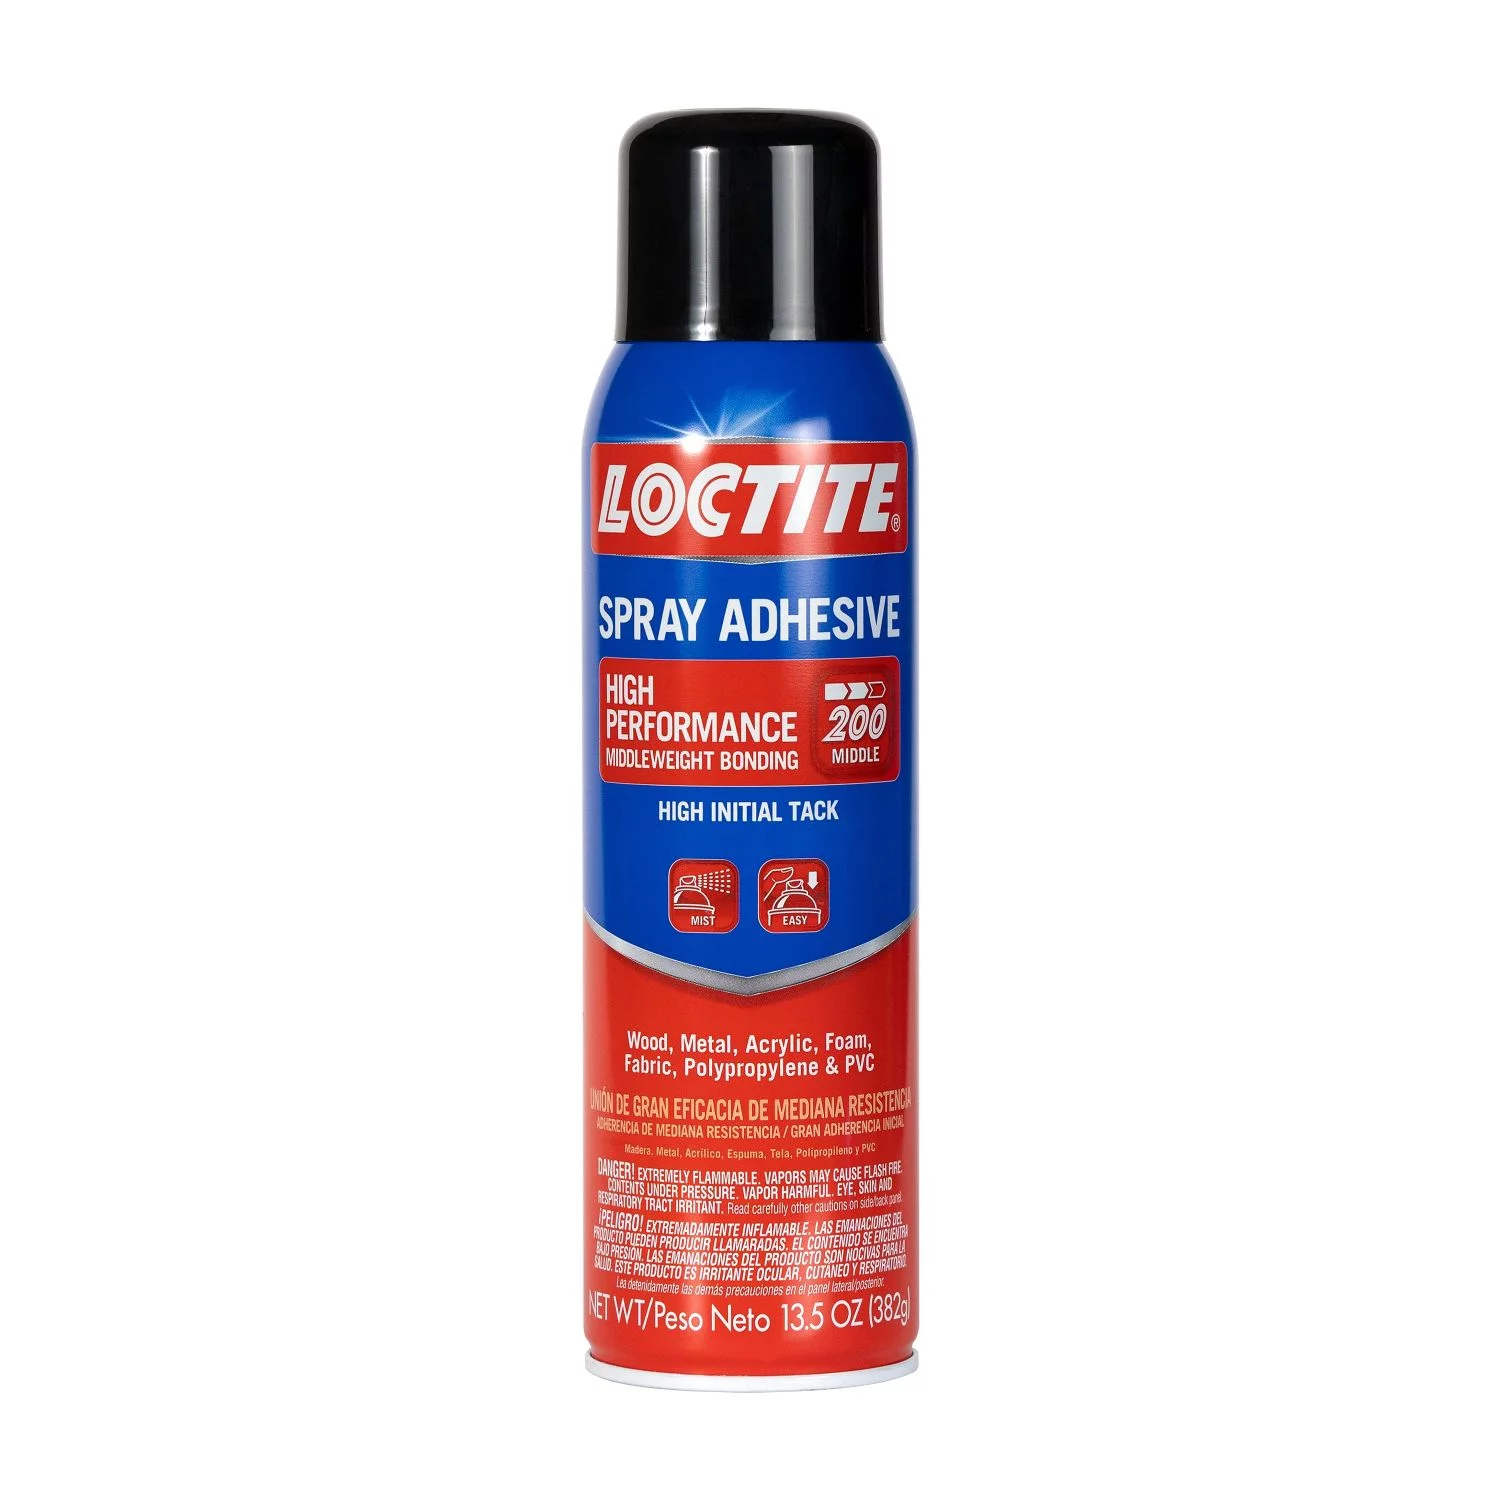 Loctite High Performance Spray Adhesive, Pack of 1, Clear 13.5 oz Can